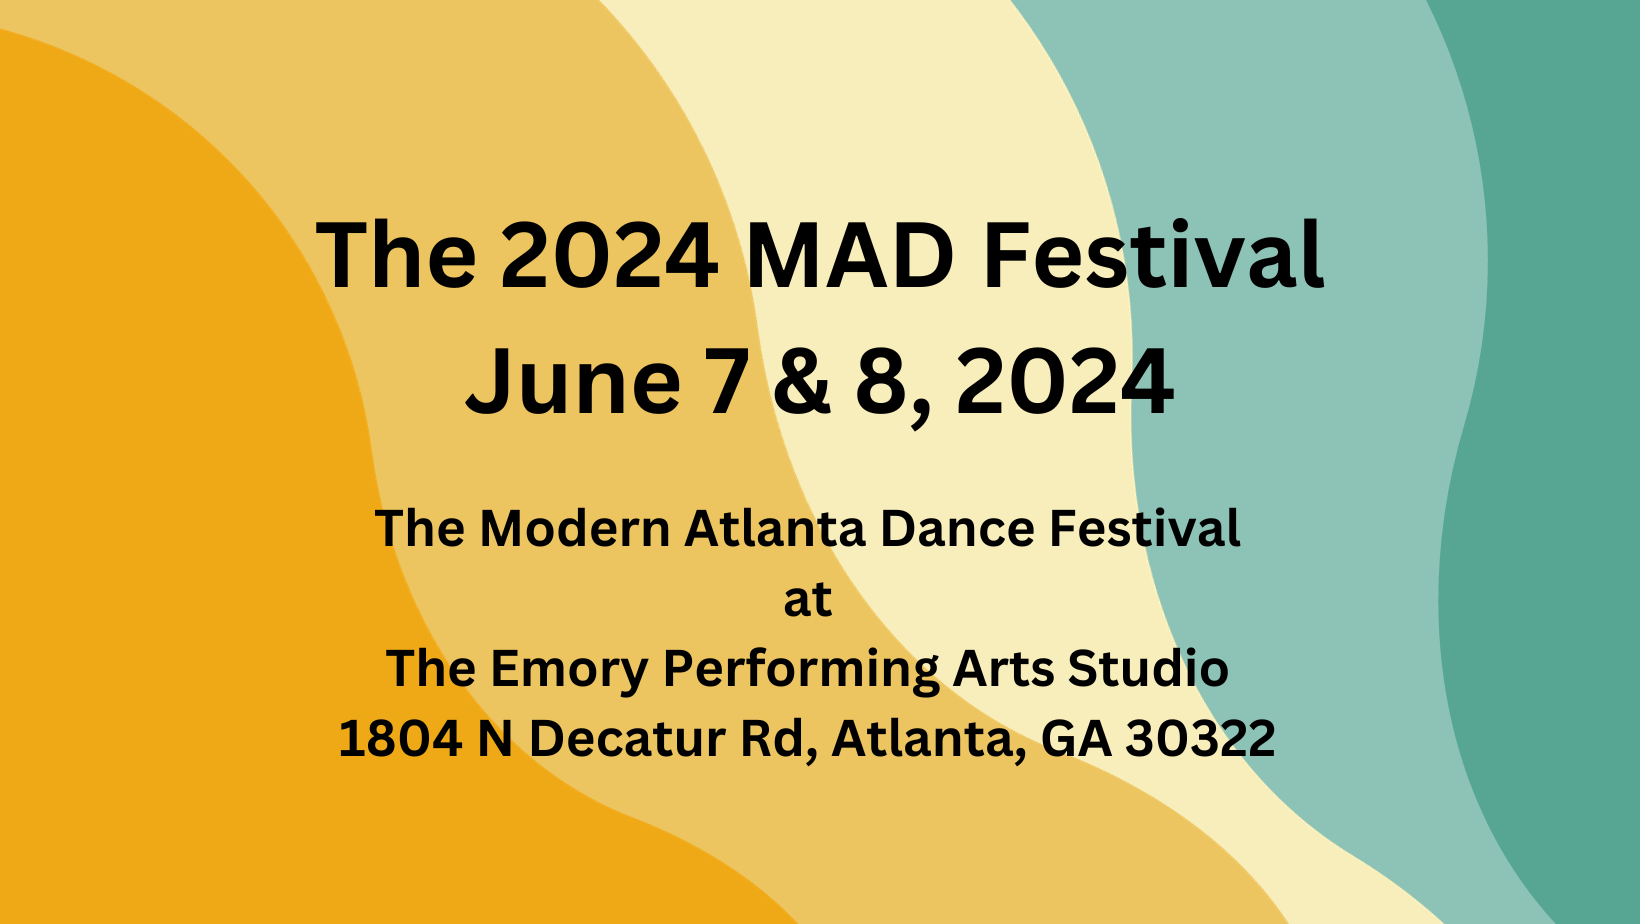 Against a yellow and turquoise background, the words The 2023 MAD Festival, June 7 & 2024. The Modern Atlanta Dance Festival at the Emory Performing Arts Center, 1804 N Decatur Rd, Atlanta, GA 30322